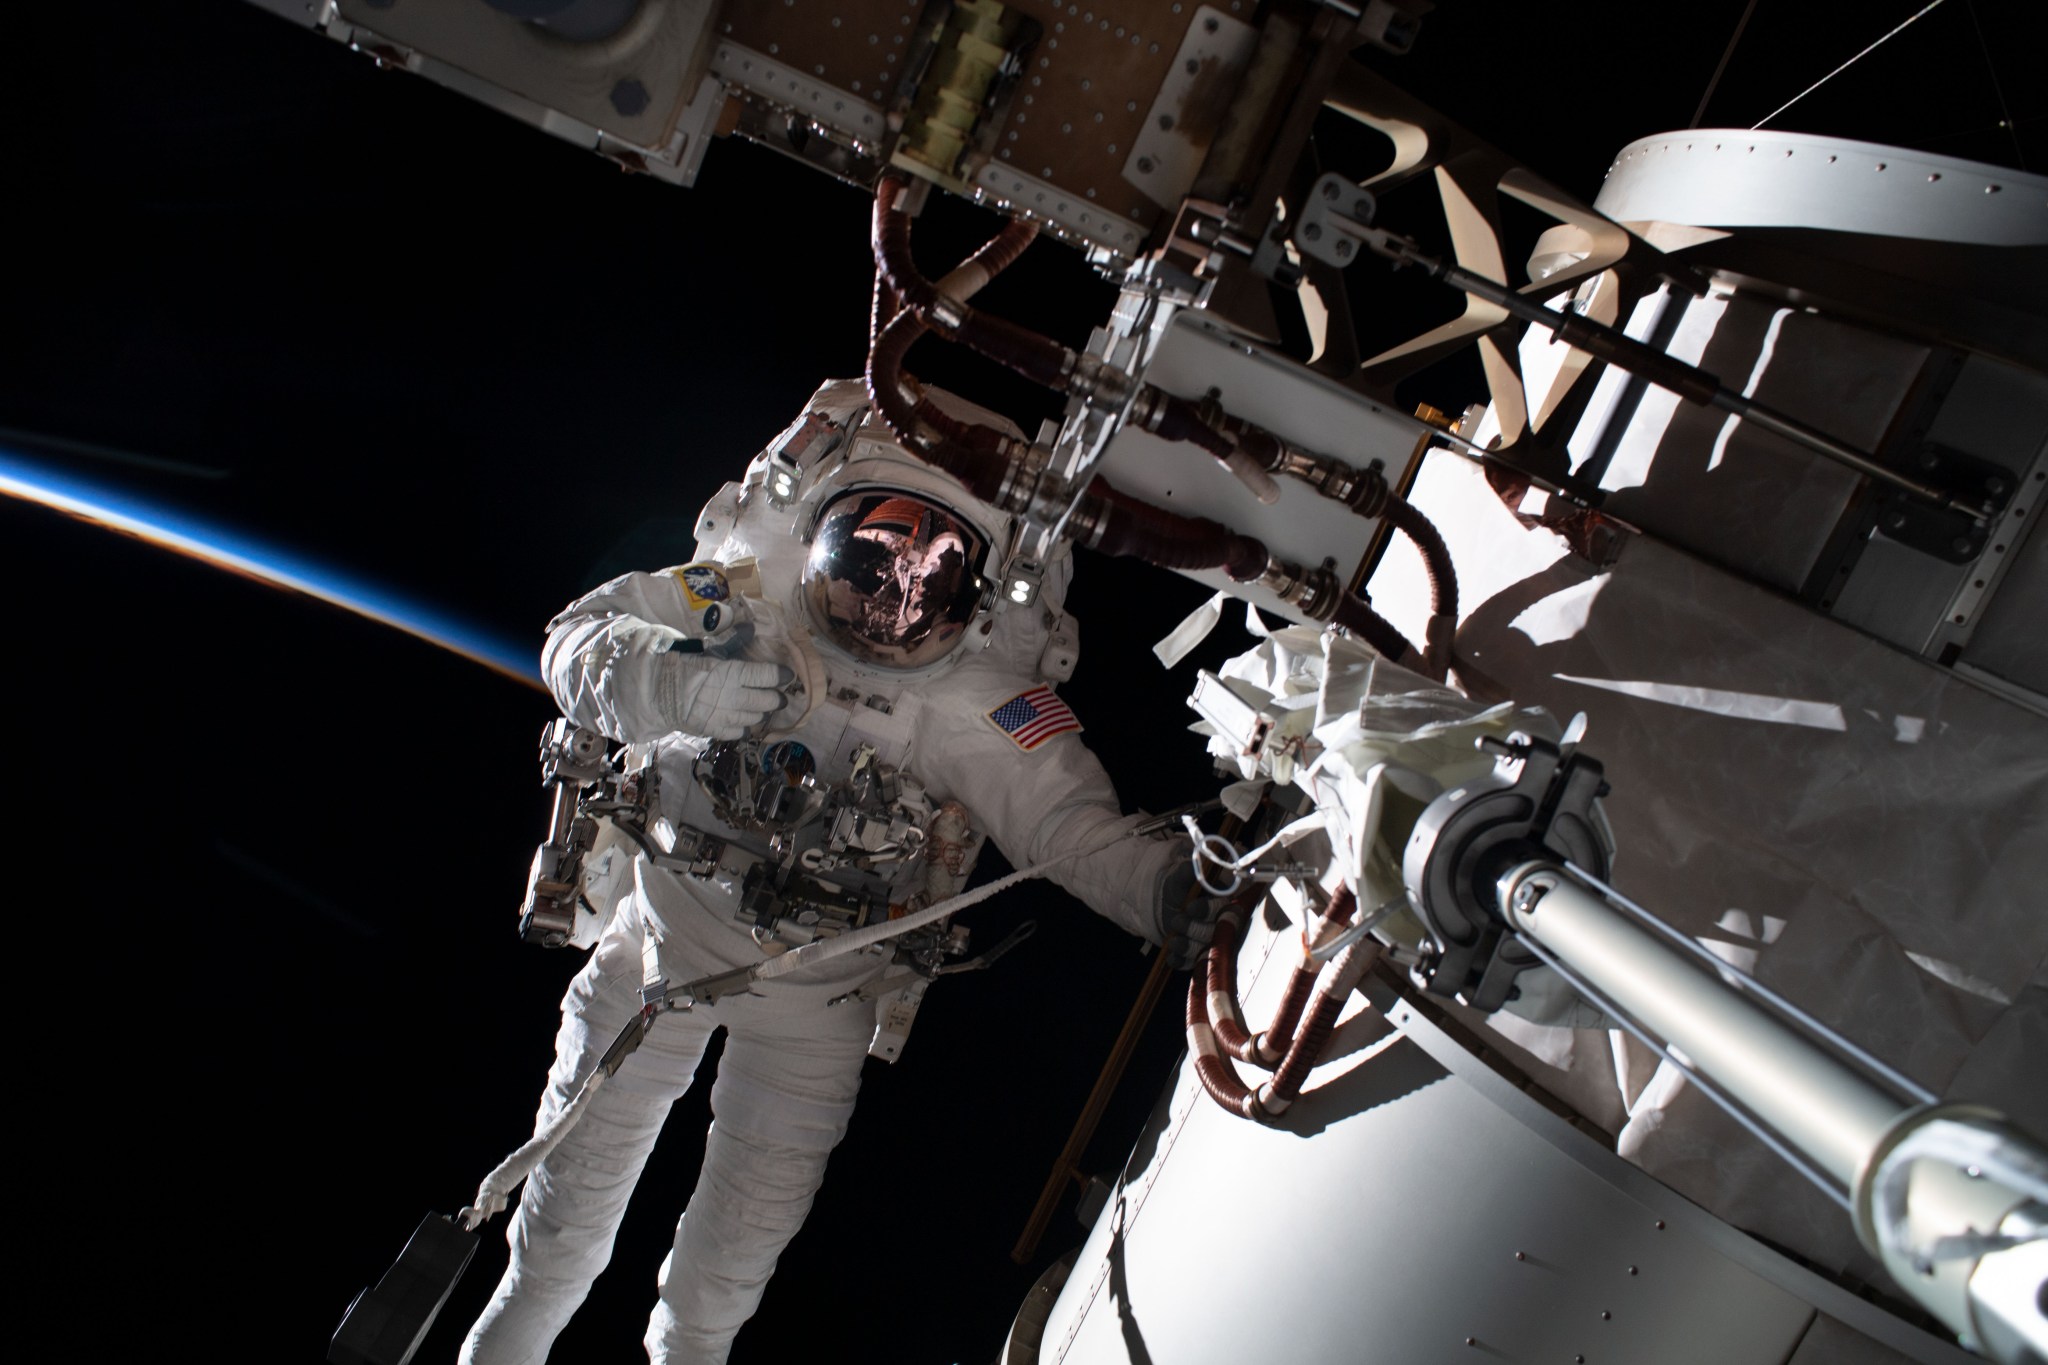 iss068e022435 (Nov. 15, 2022) --- NASA astronaut and Expedition 68 Flight Engineer Frank Rubio is pictured during a spacewalk tethered to the International Space Station's starboard truss structure. Behind Rubio, the last rays of an orbital sunset penetrate Earth's thin atmosphere as the space station flew 258 miles above the African nation of Algeria.